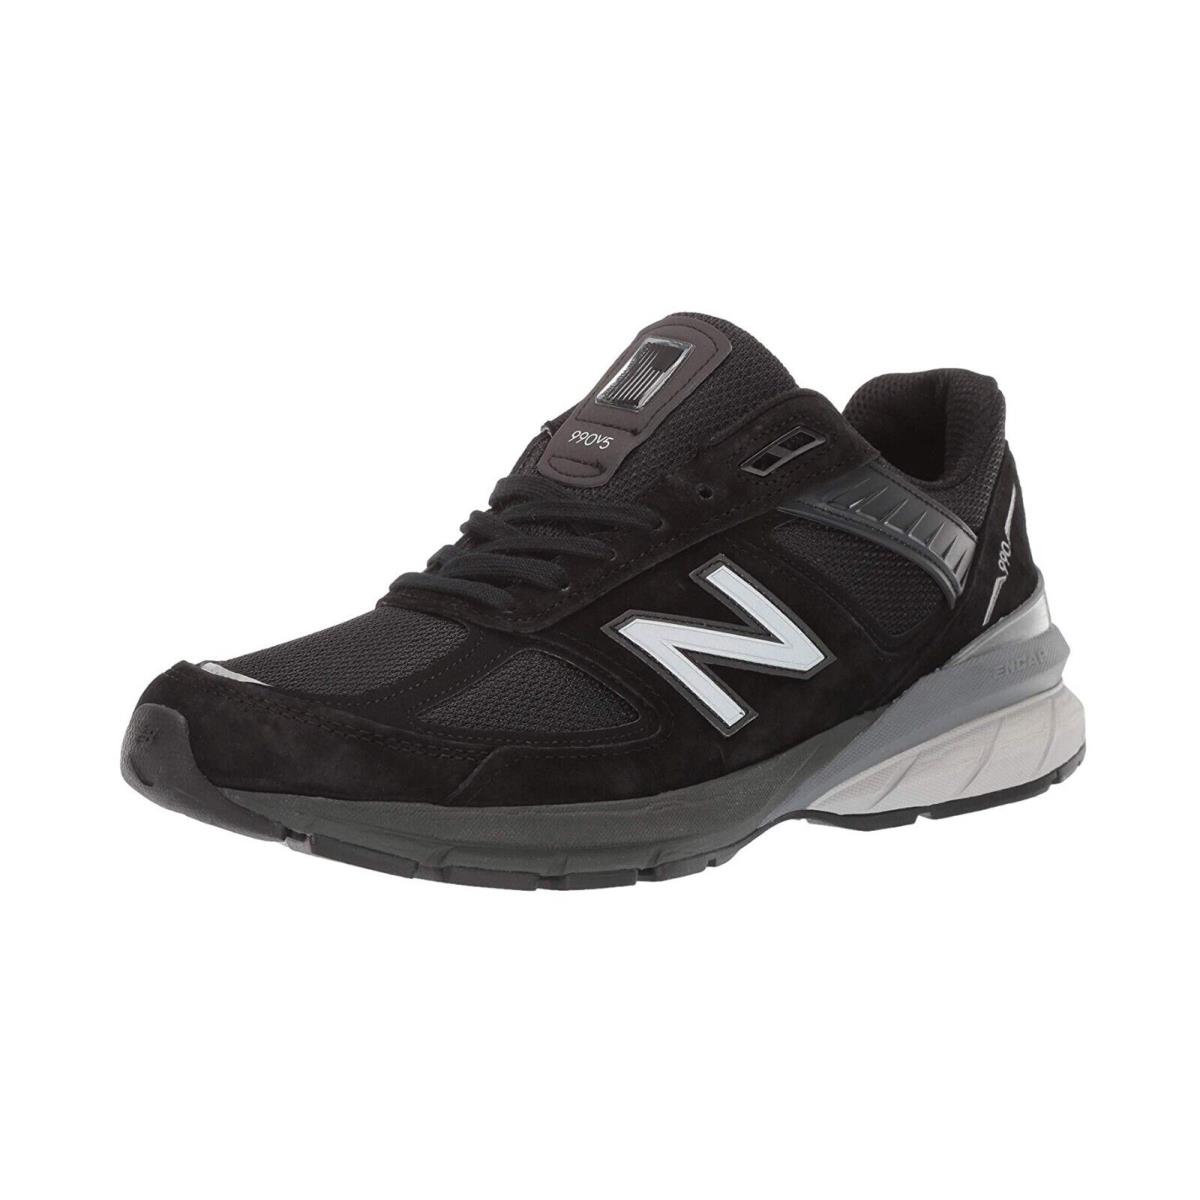 New Balance Men`s 990v5 Made in Usa Shoes Sneakers M990BK5 - Black/white